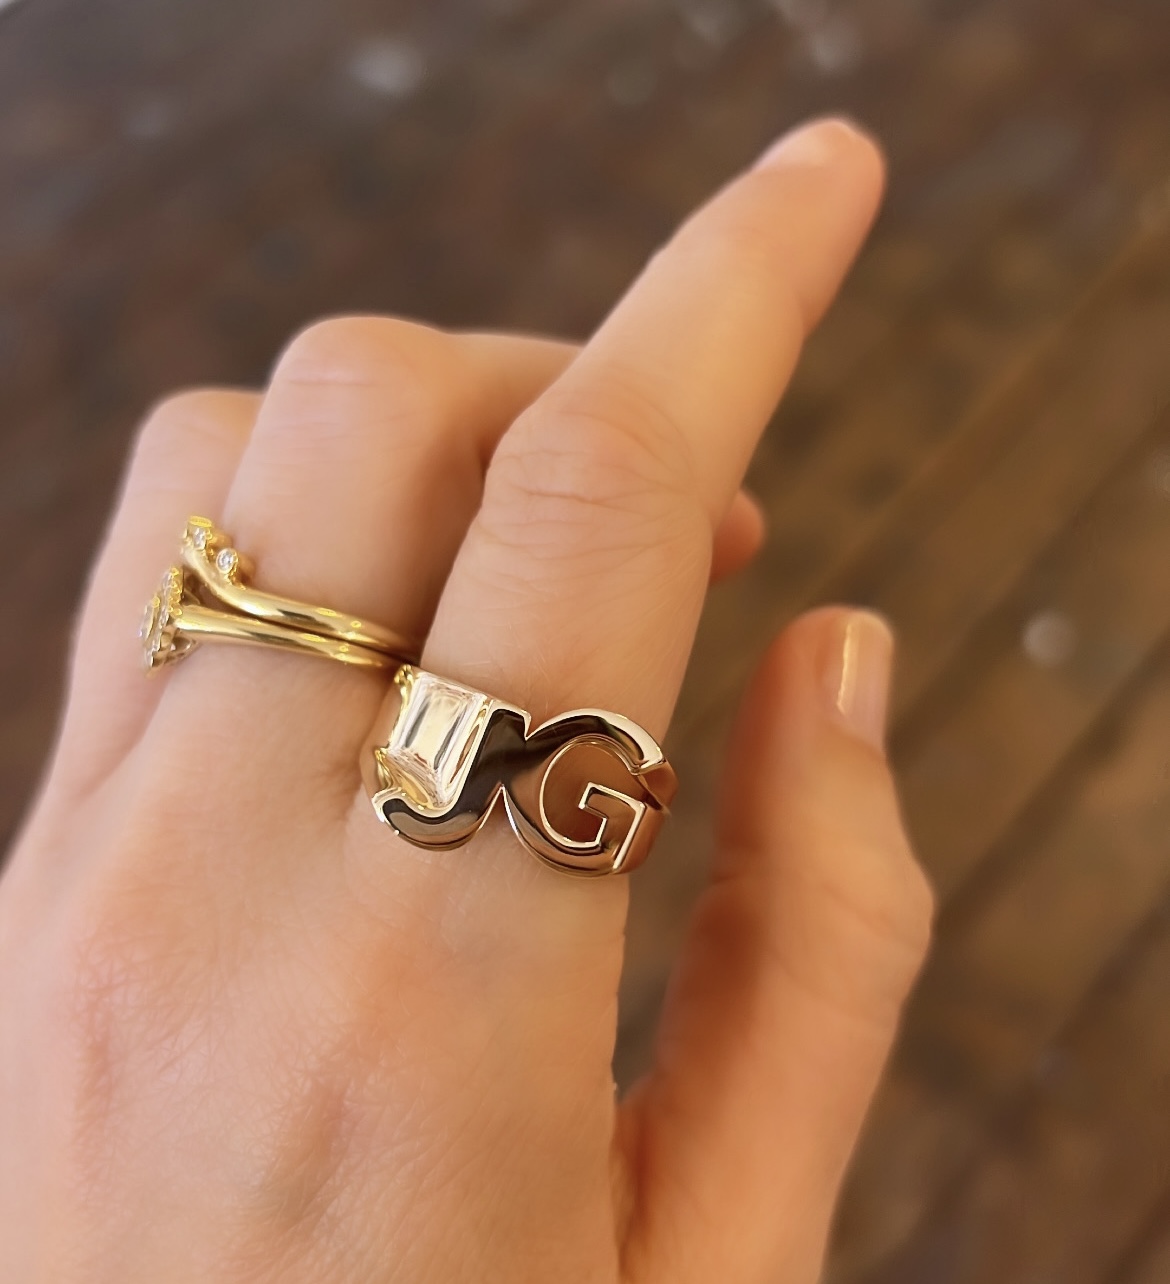 Taking Care of Business Bespoke Initials Ring Yellow Gold